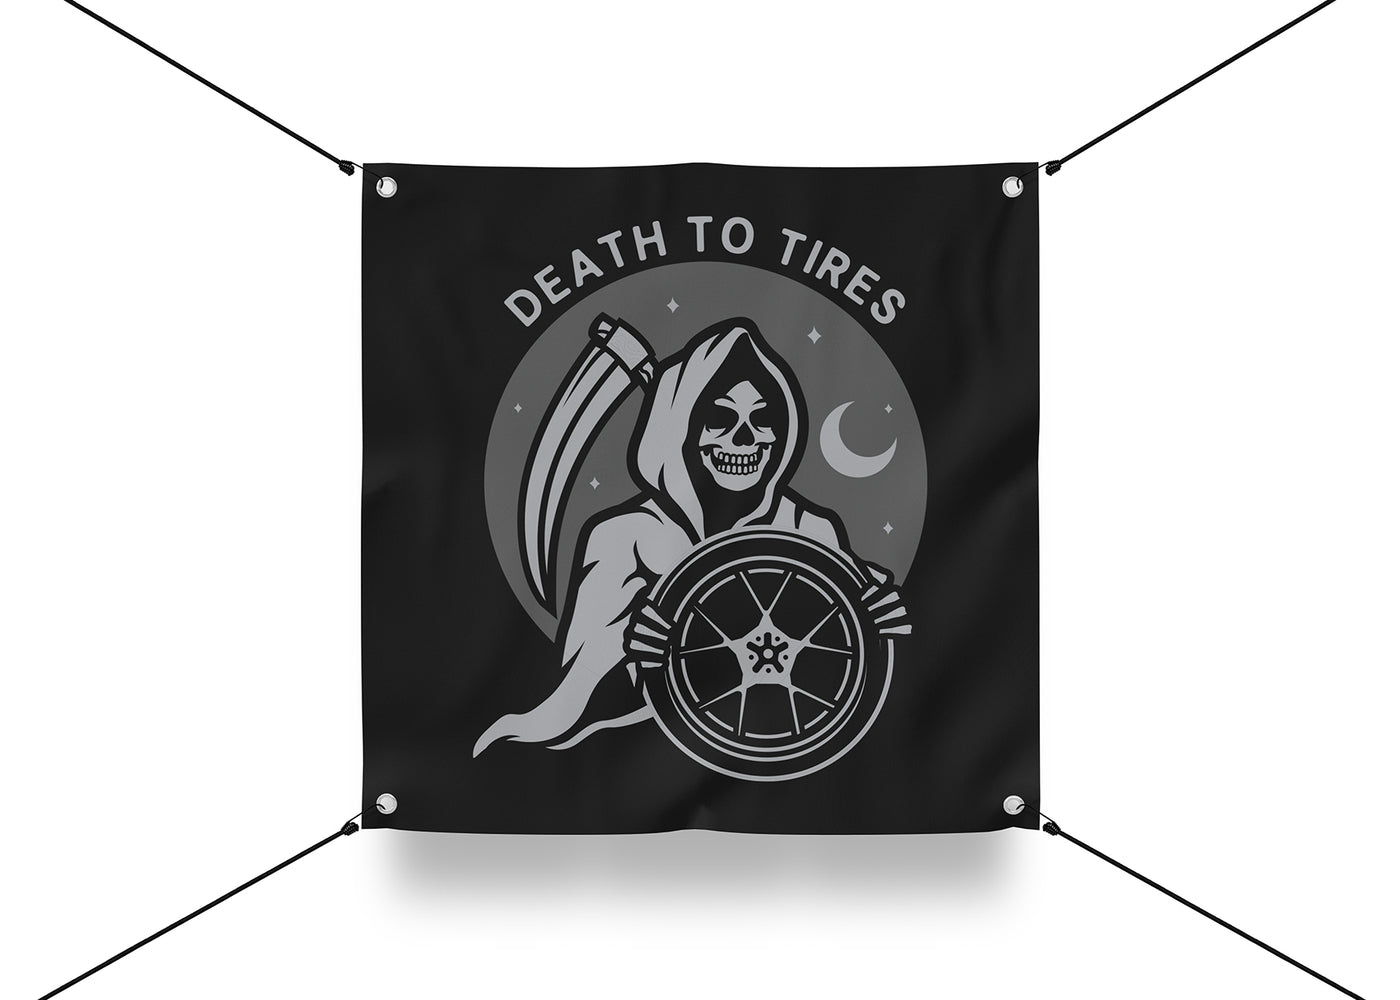 Garage Banner – Death To Tires (Black Friday Limited Edition)